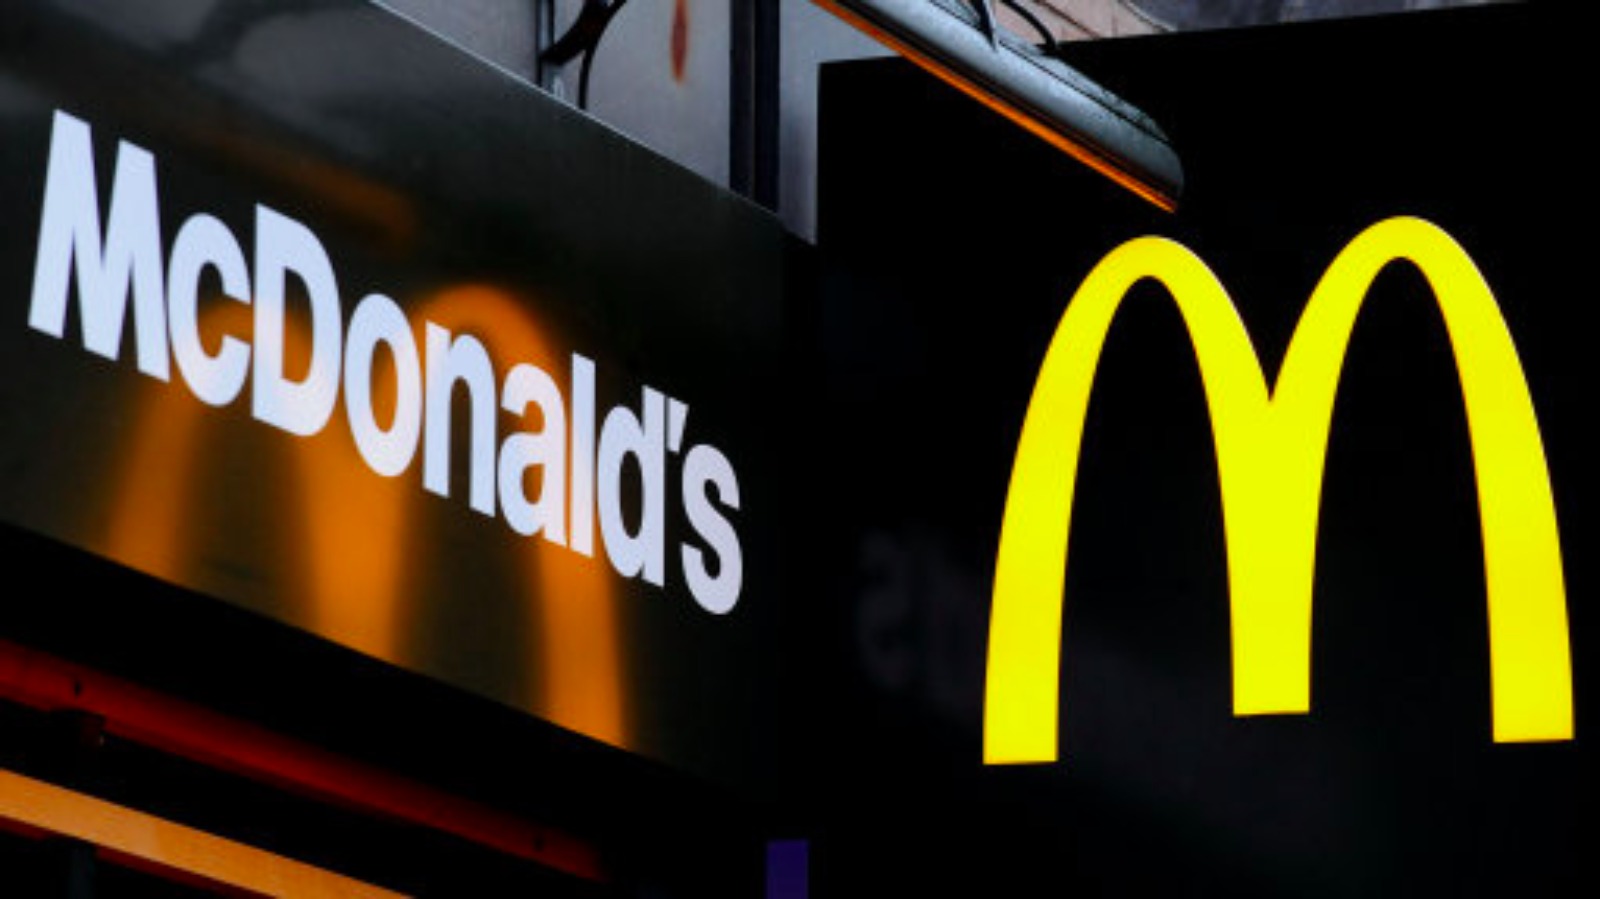 McDonald’s UK has just struck a deal with Samsung to provide Galaxy tablets to the hungry kids waiting for their Happy Meals.